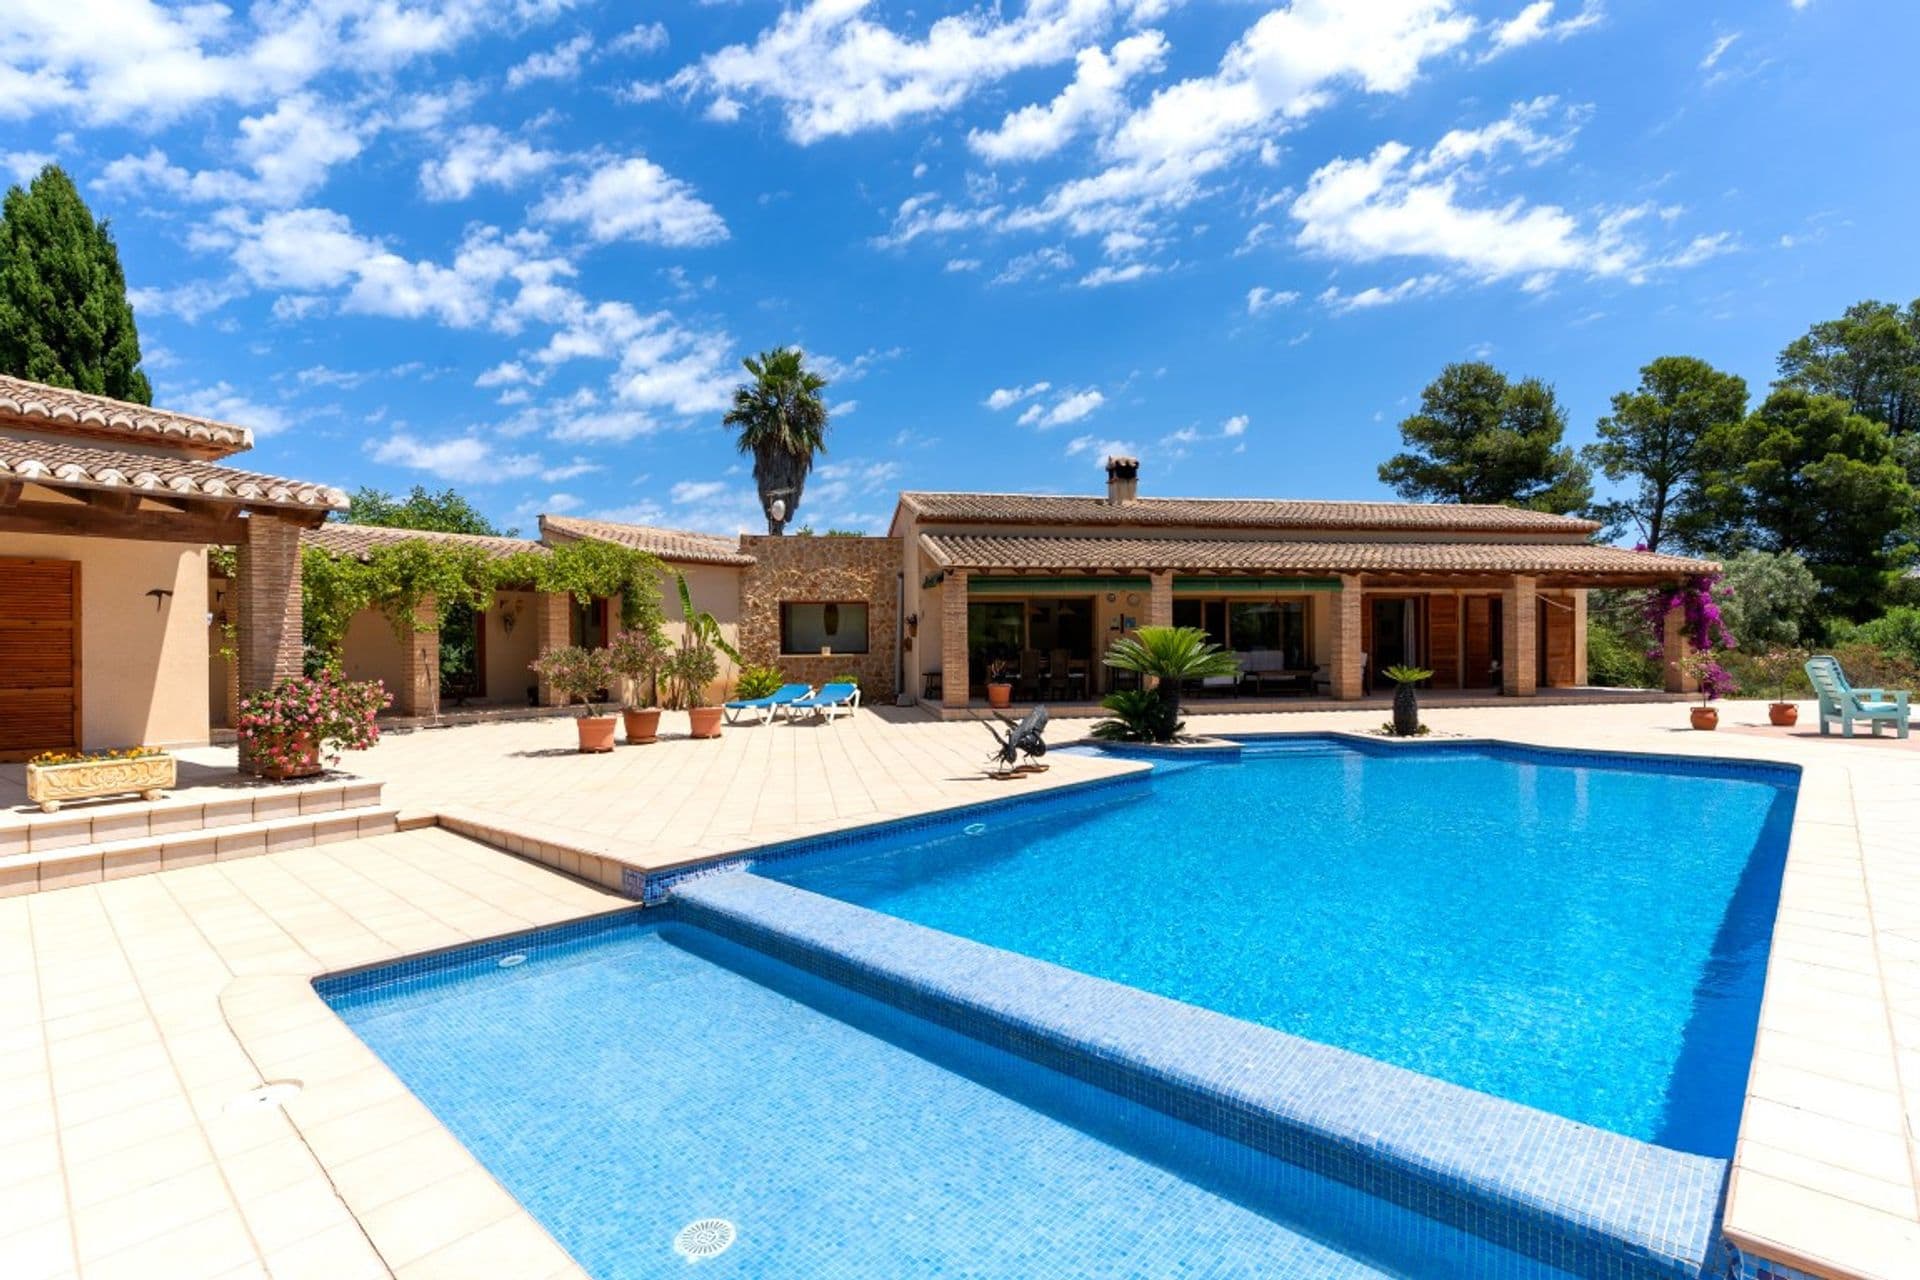 Villa with terrace areas and large pool in La Plana, Jávea.